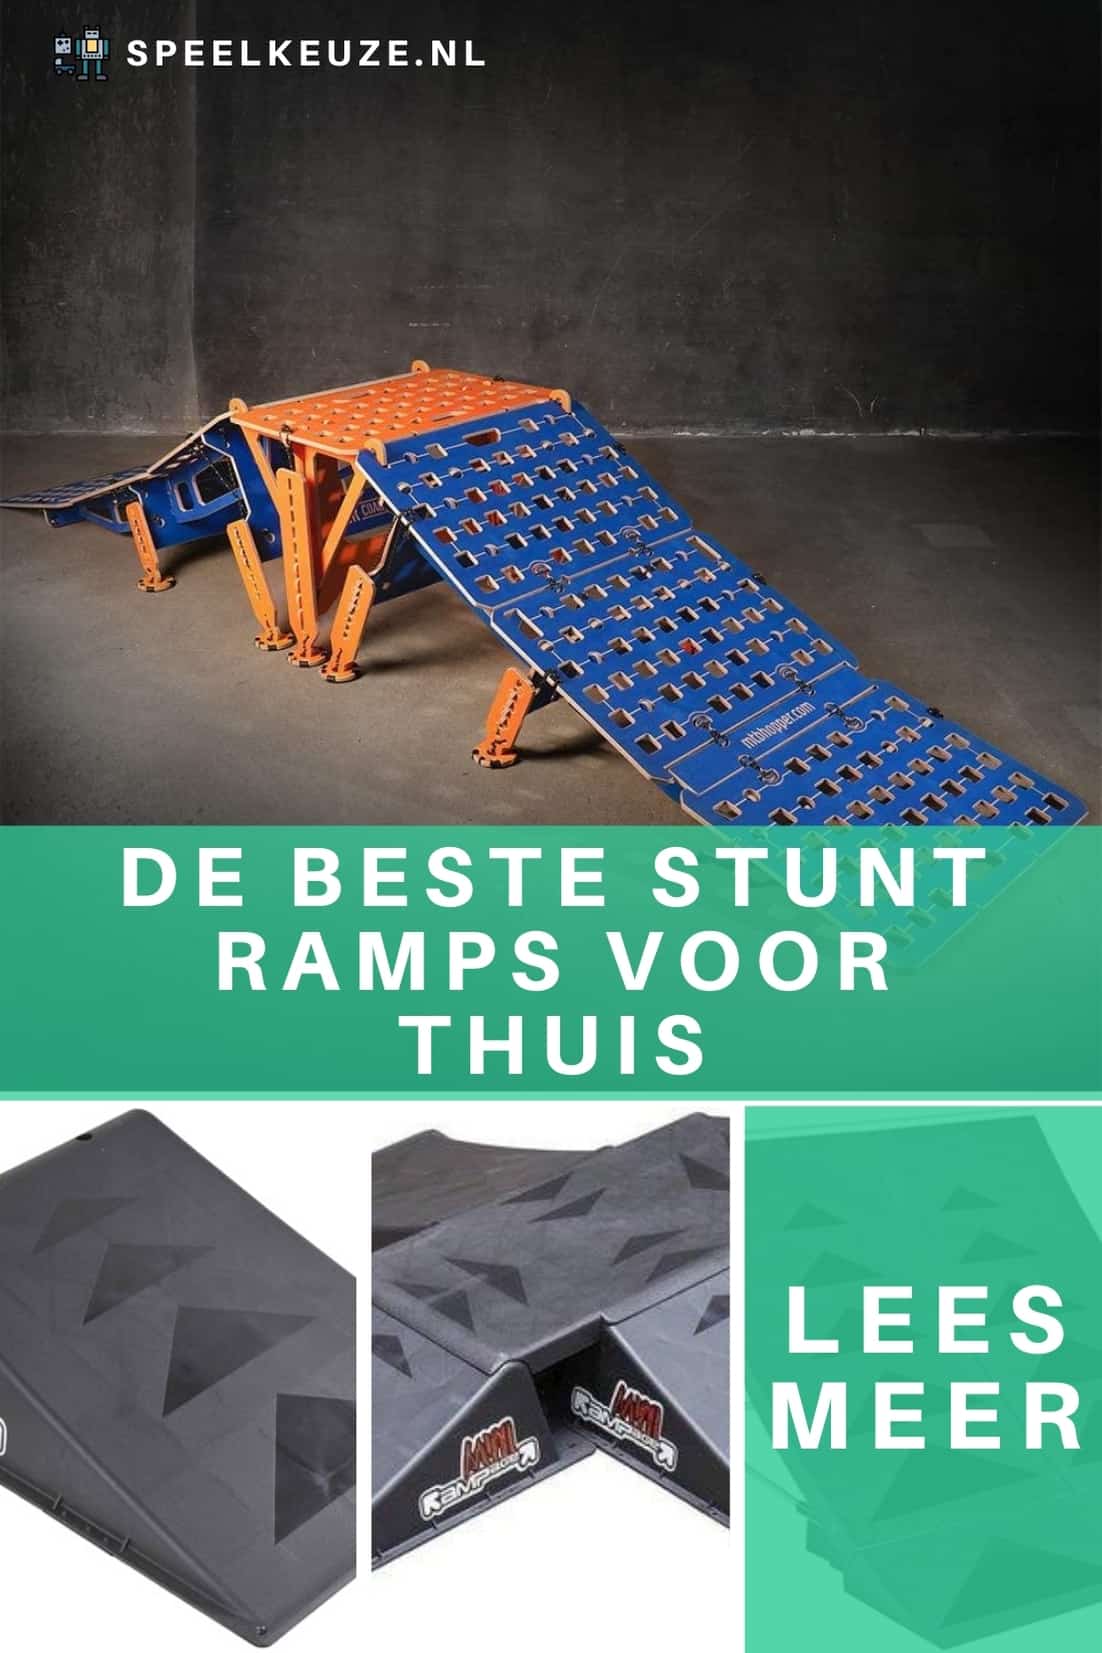 The best stunt ramps for your home